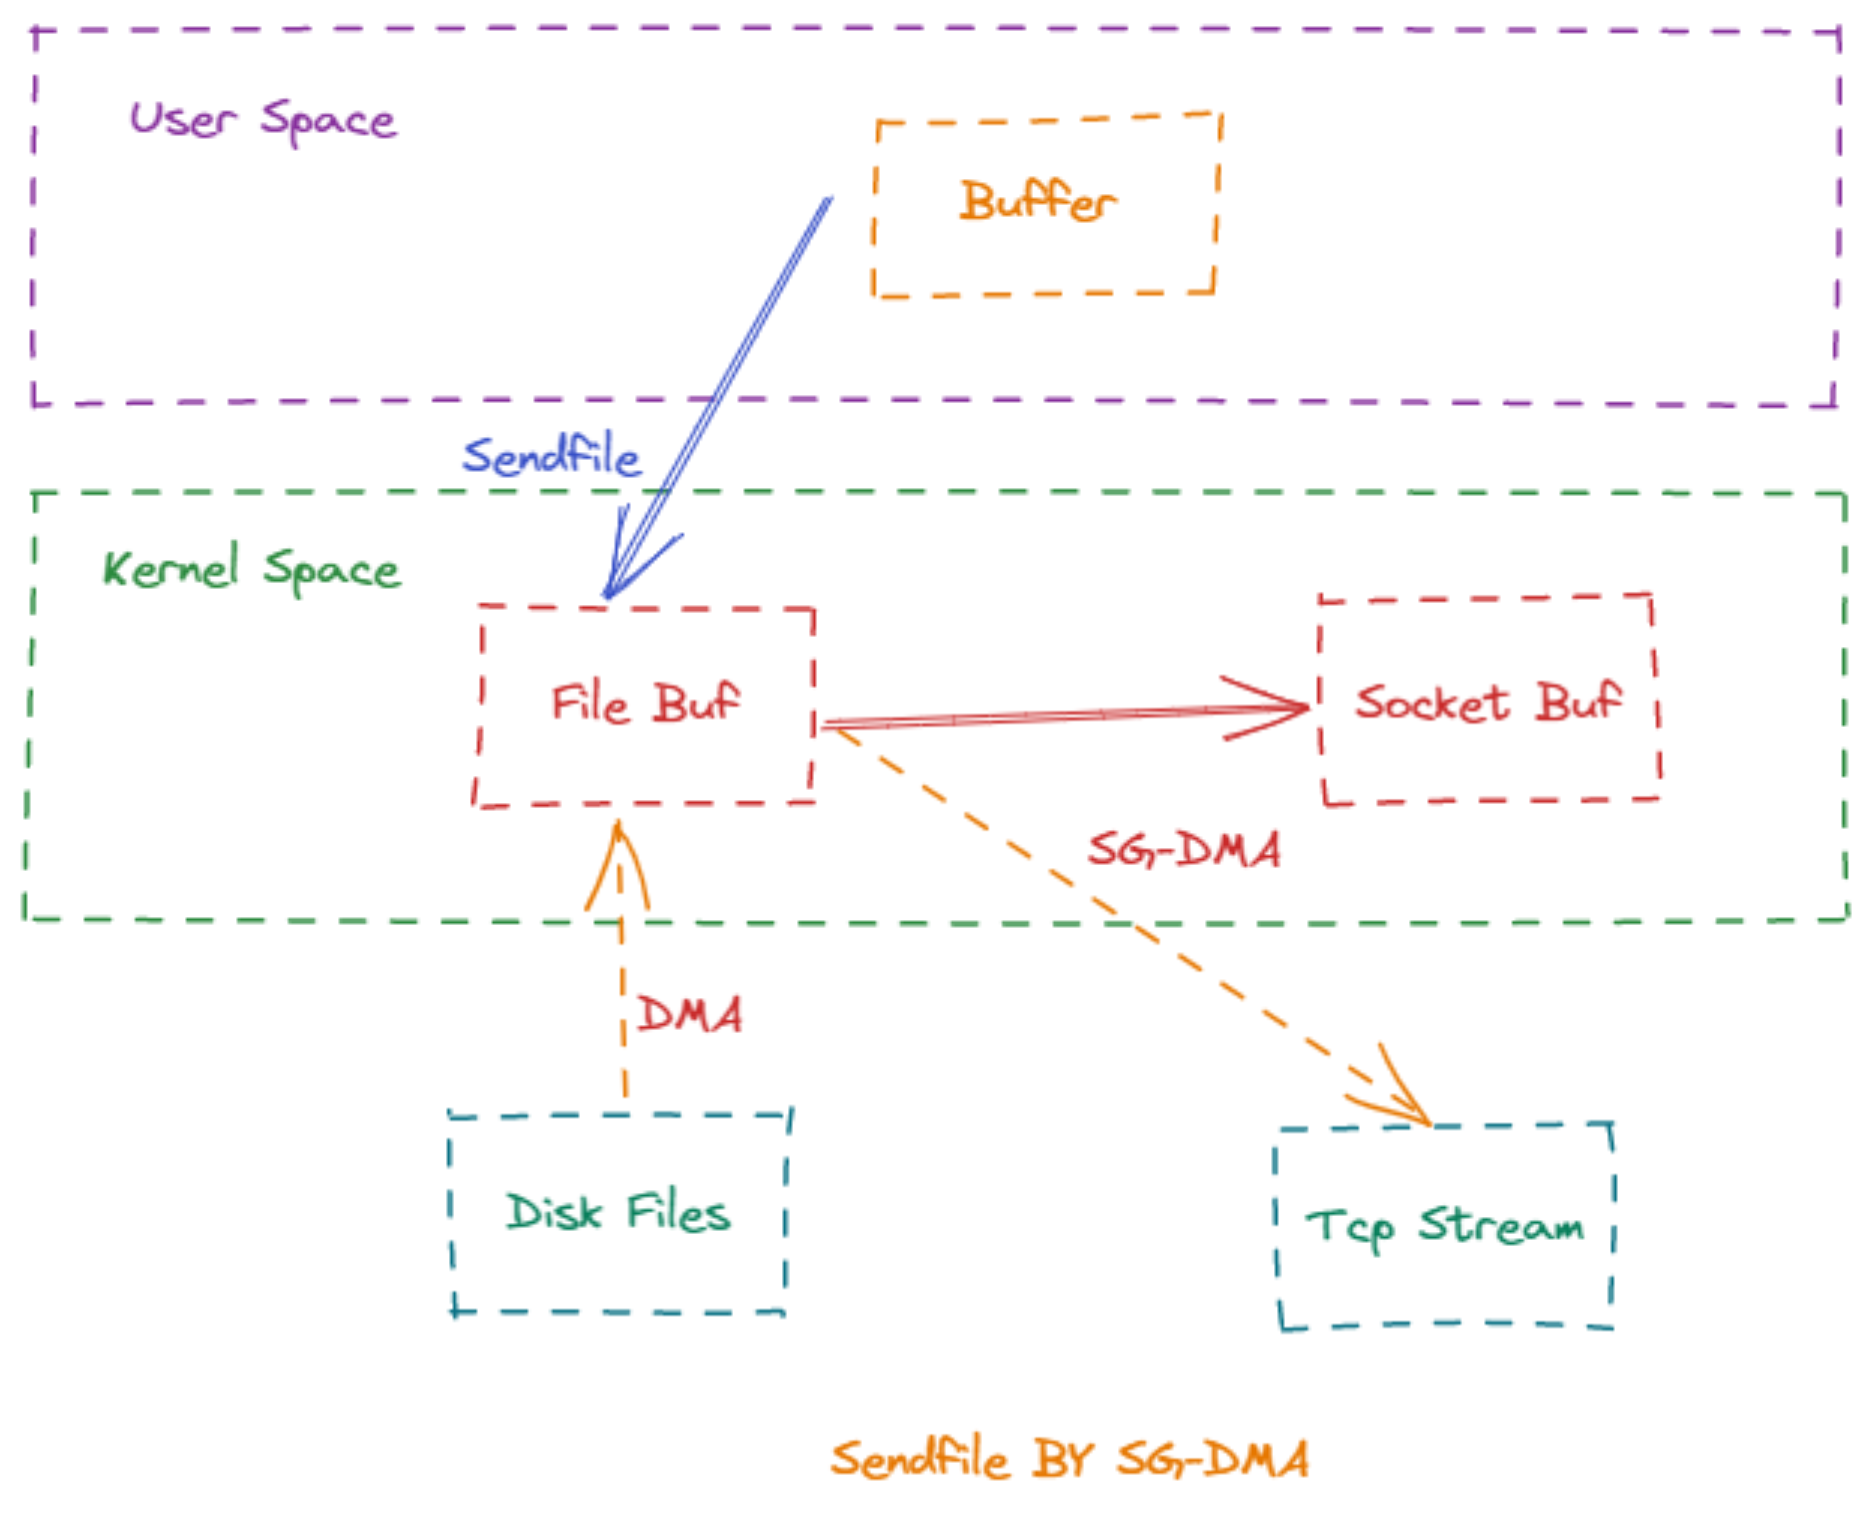 How sendfile works